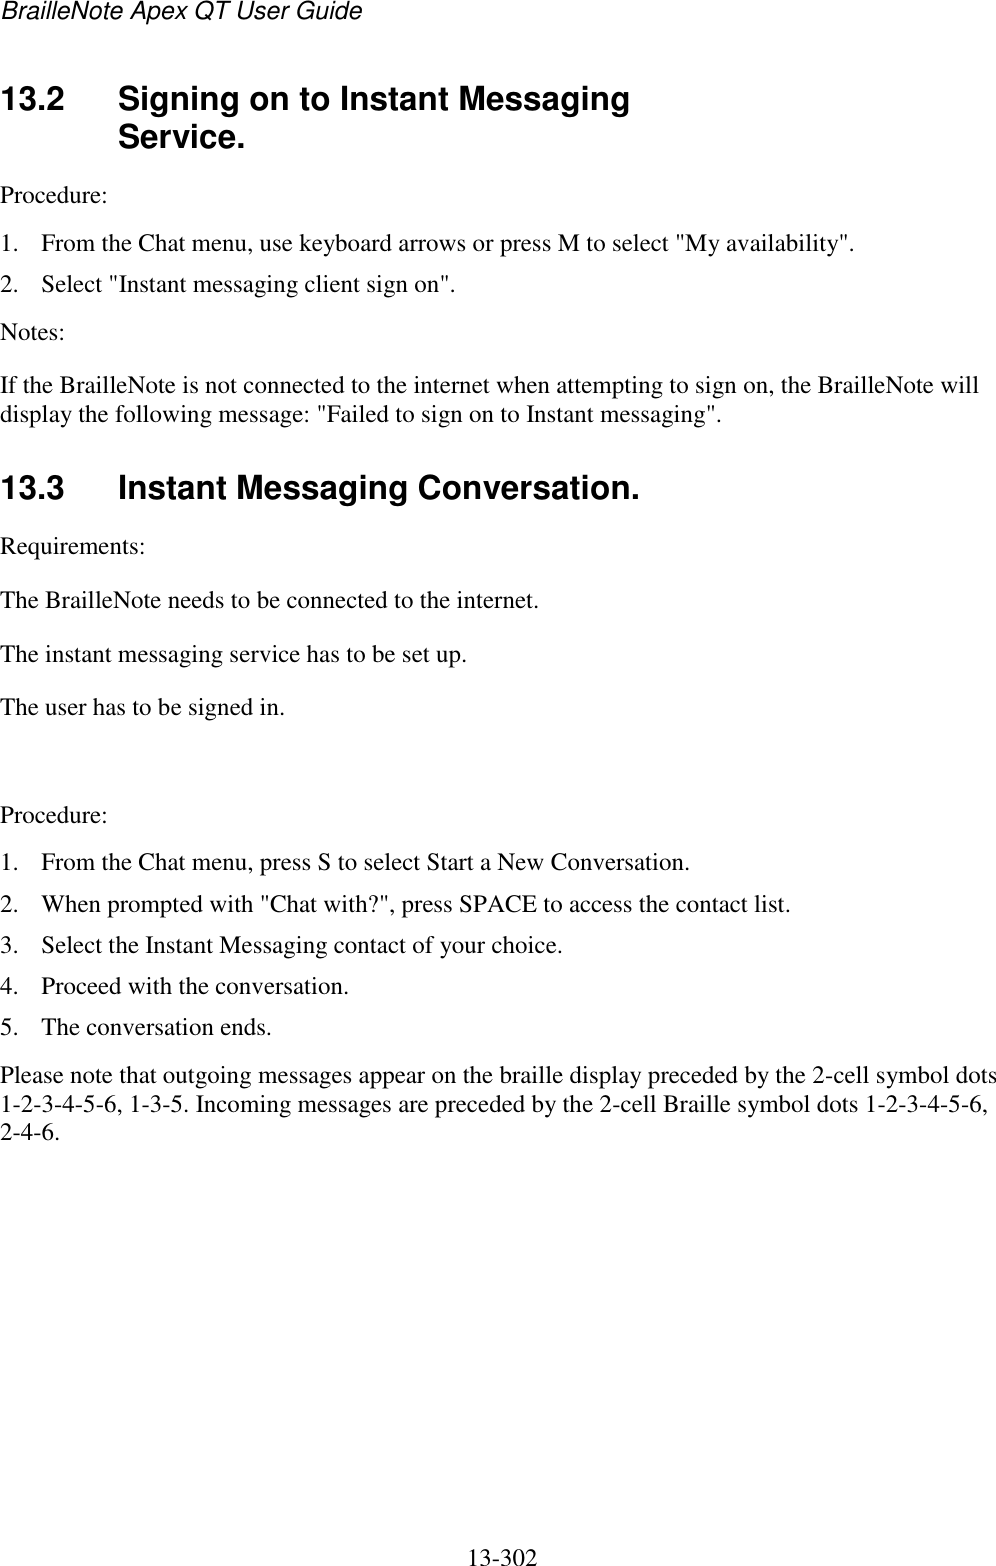 BrailleNote Apex QT User Guide  13-302   13.2  Signing on to Instant Messaging Service. Procedure: 1. From the Chat menu, use keyboard arrows or press M to select &quot;My availability&quot;. 2. Select &quot;Instant messaging client sign on&quot;. Notes:  If the BrailleNote is not connected to the internet when attempting to sign on, the BrailleNote will display the following message: &quot;Failed to sign on to Instant messaging&quot;.  13.3  Instant Messaging Conversation. Requirements:  The BrailleNote needs to be connected to the internet.  The instant messaging service has to be set up. The user has to be signed in.   Procedure:  1. From the Chat menu, press S to select Start a New Conversation.  2. When prompted with &quot;Chat with?&quot;, press SPACE to access the contact list.  3. Select the Instant Messaging contact of your choice.  4. Proceed with the conversation. 5. The conversation ends. Please note that outgoing messages appear on the braille display preceded by the 2-cell symbol dots 1-2-3-4-5-6, 1-3-5. Incoming messages are preceded by the 2-cell Braille symbol dots 1-2-3-4-5-6, 2-4-6.  